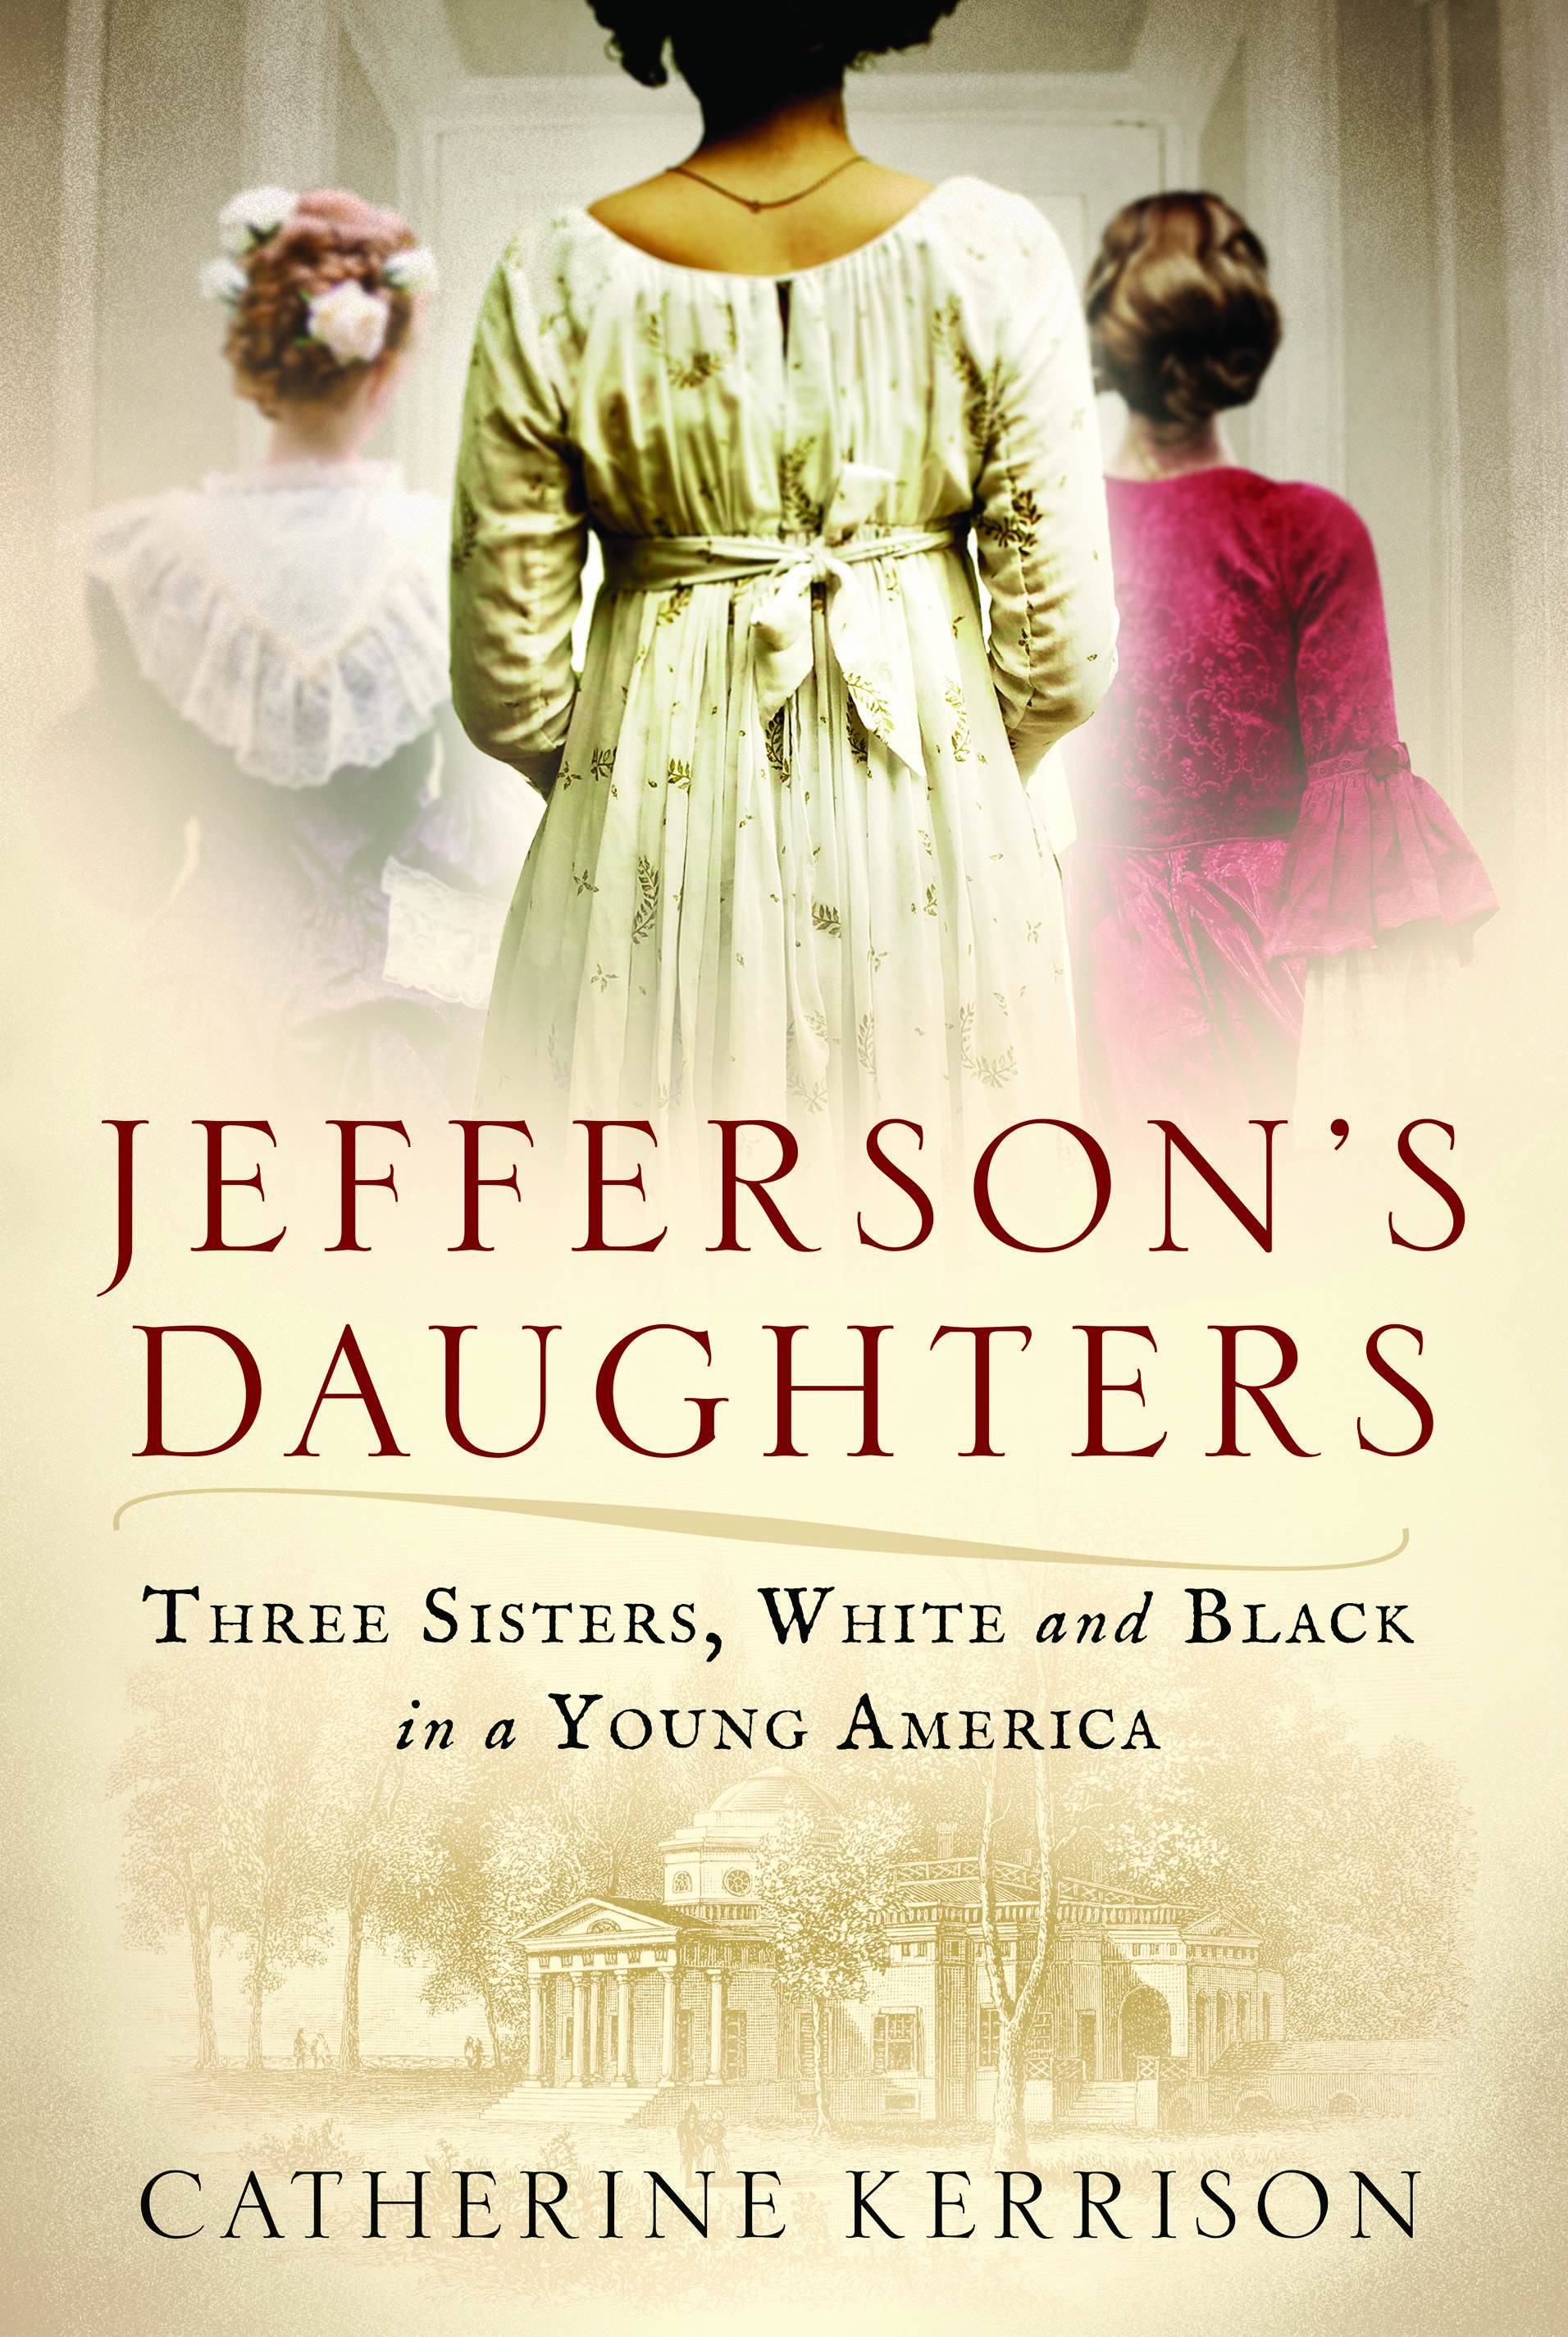 The Bookworm Sez: ‘Jefferson’s Daughters’ tells complicated tale